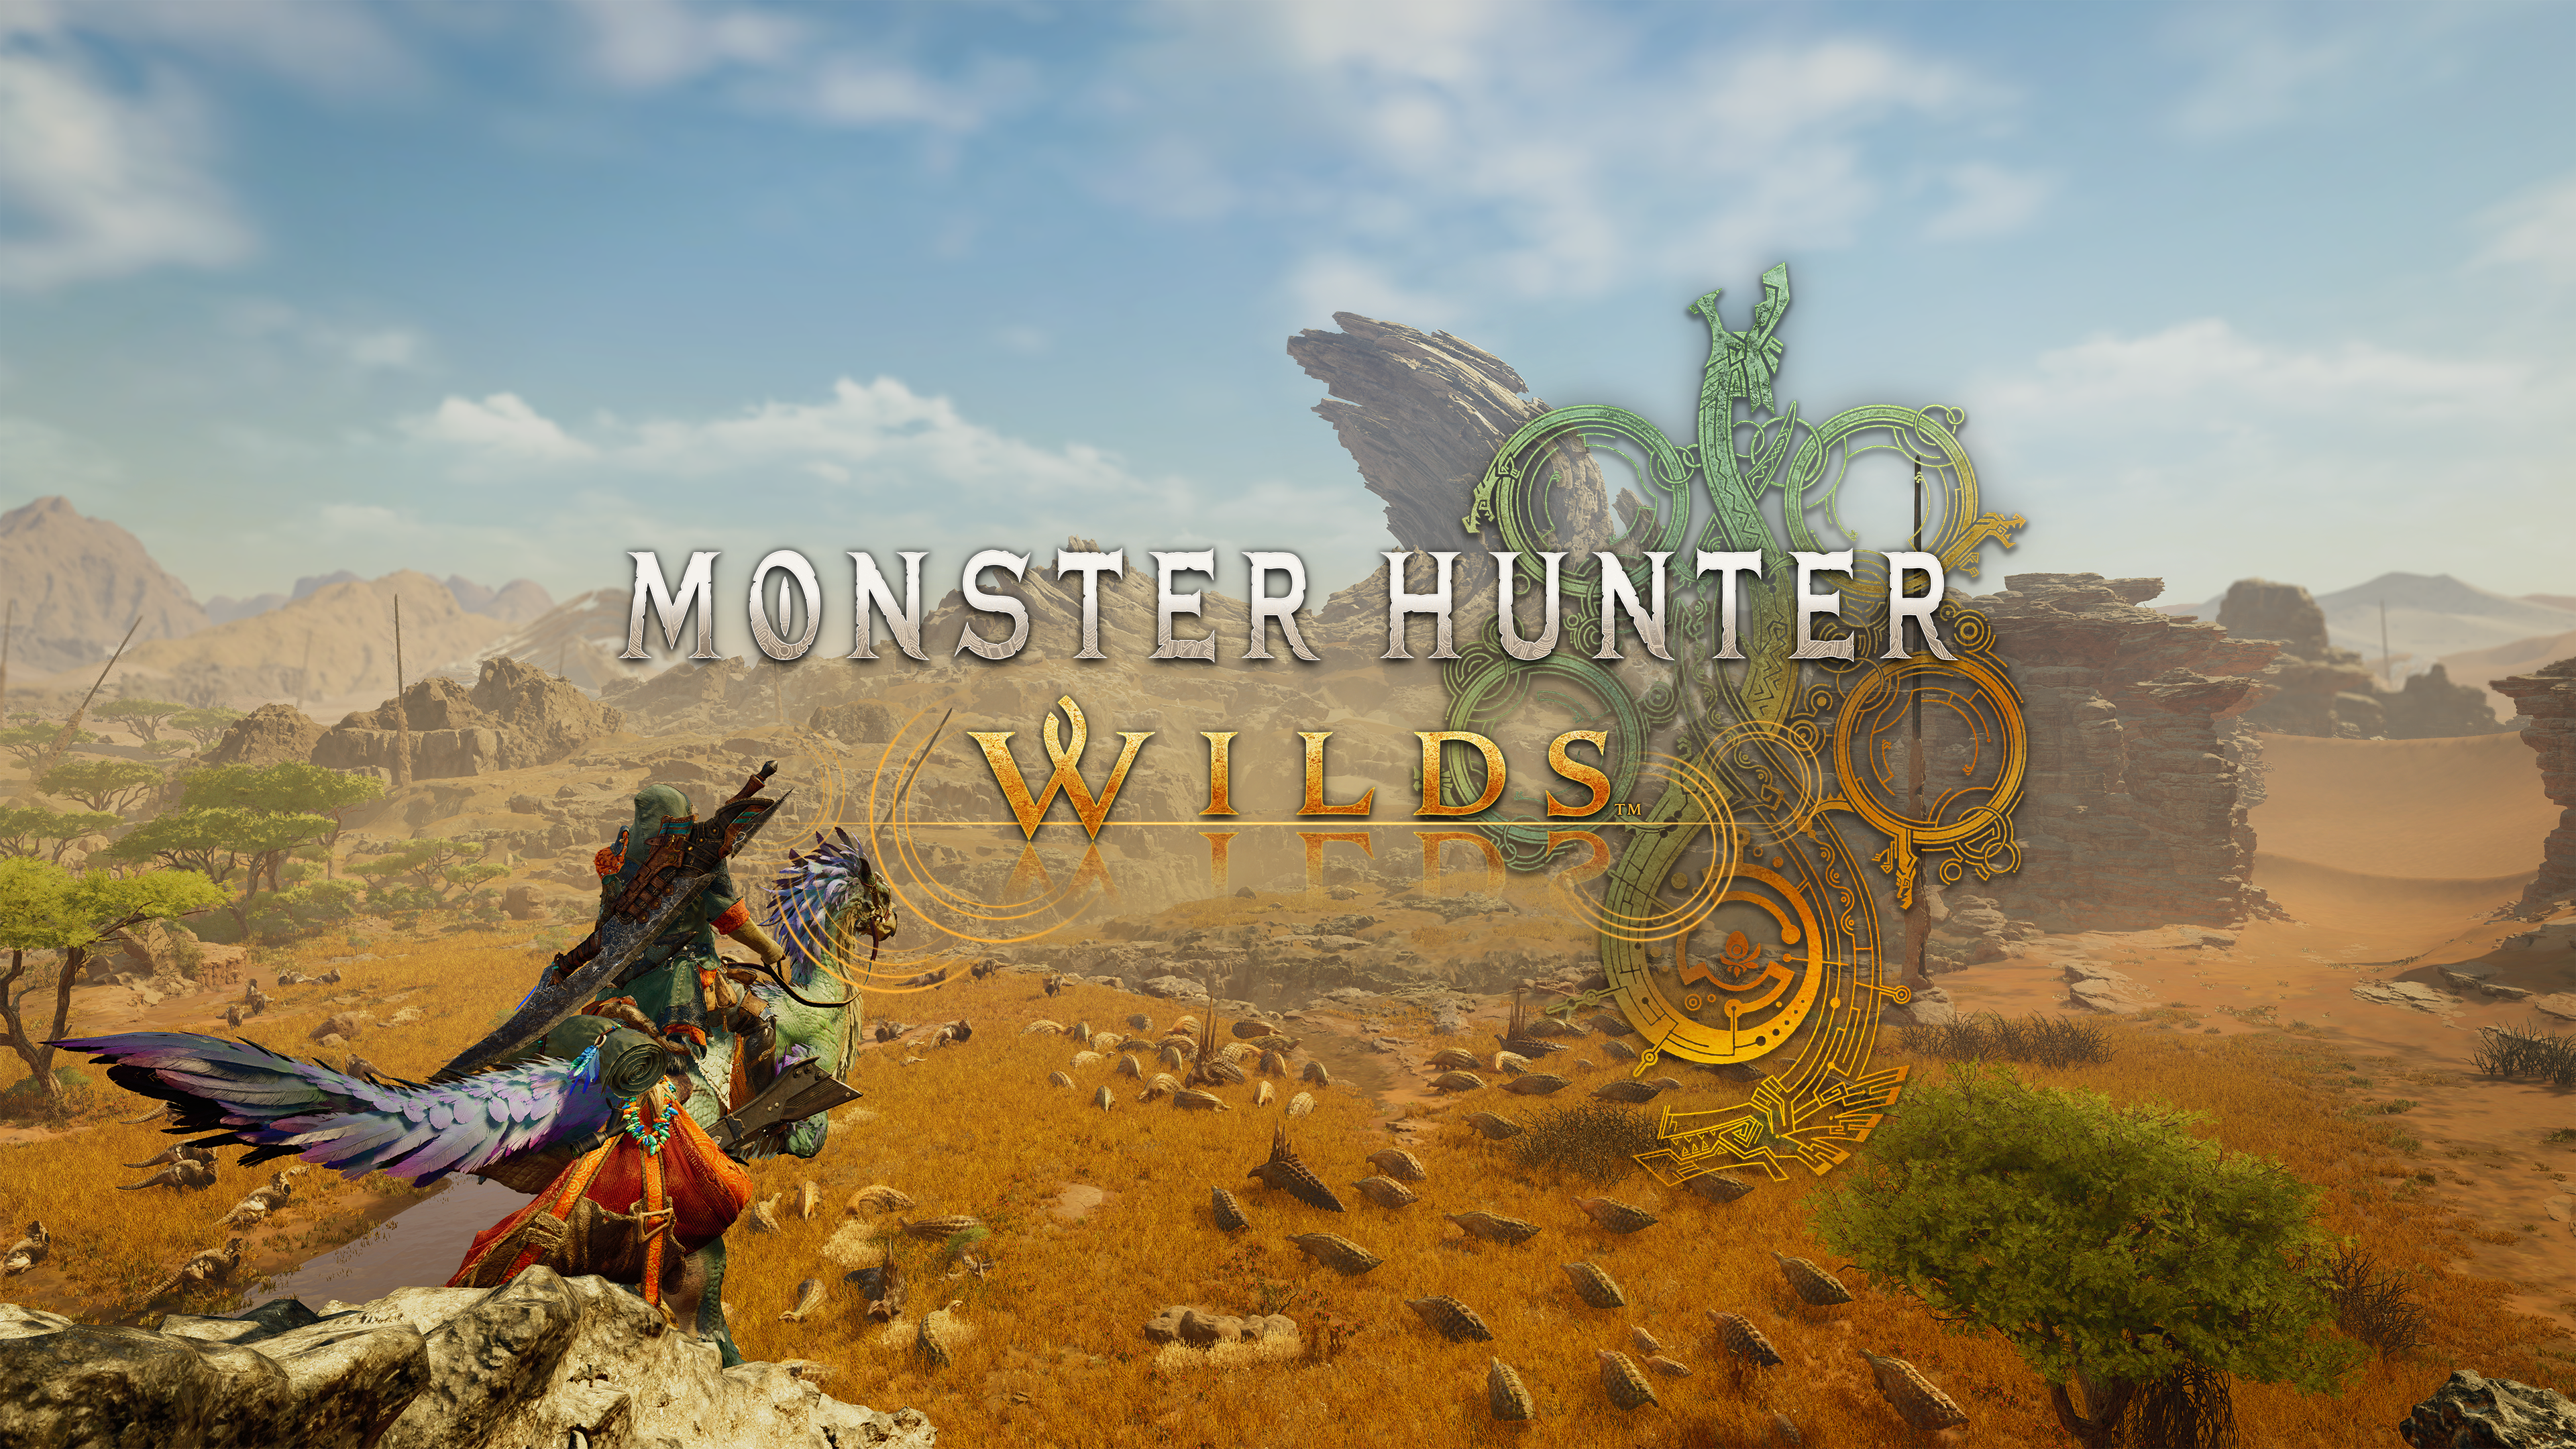 Monster Hunter Wilds announced, coming in 2025